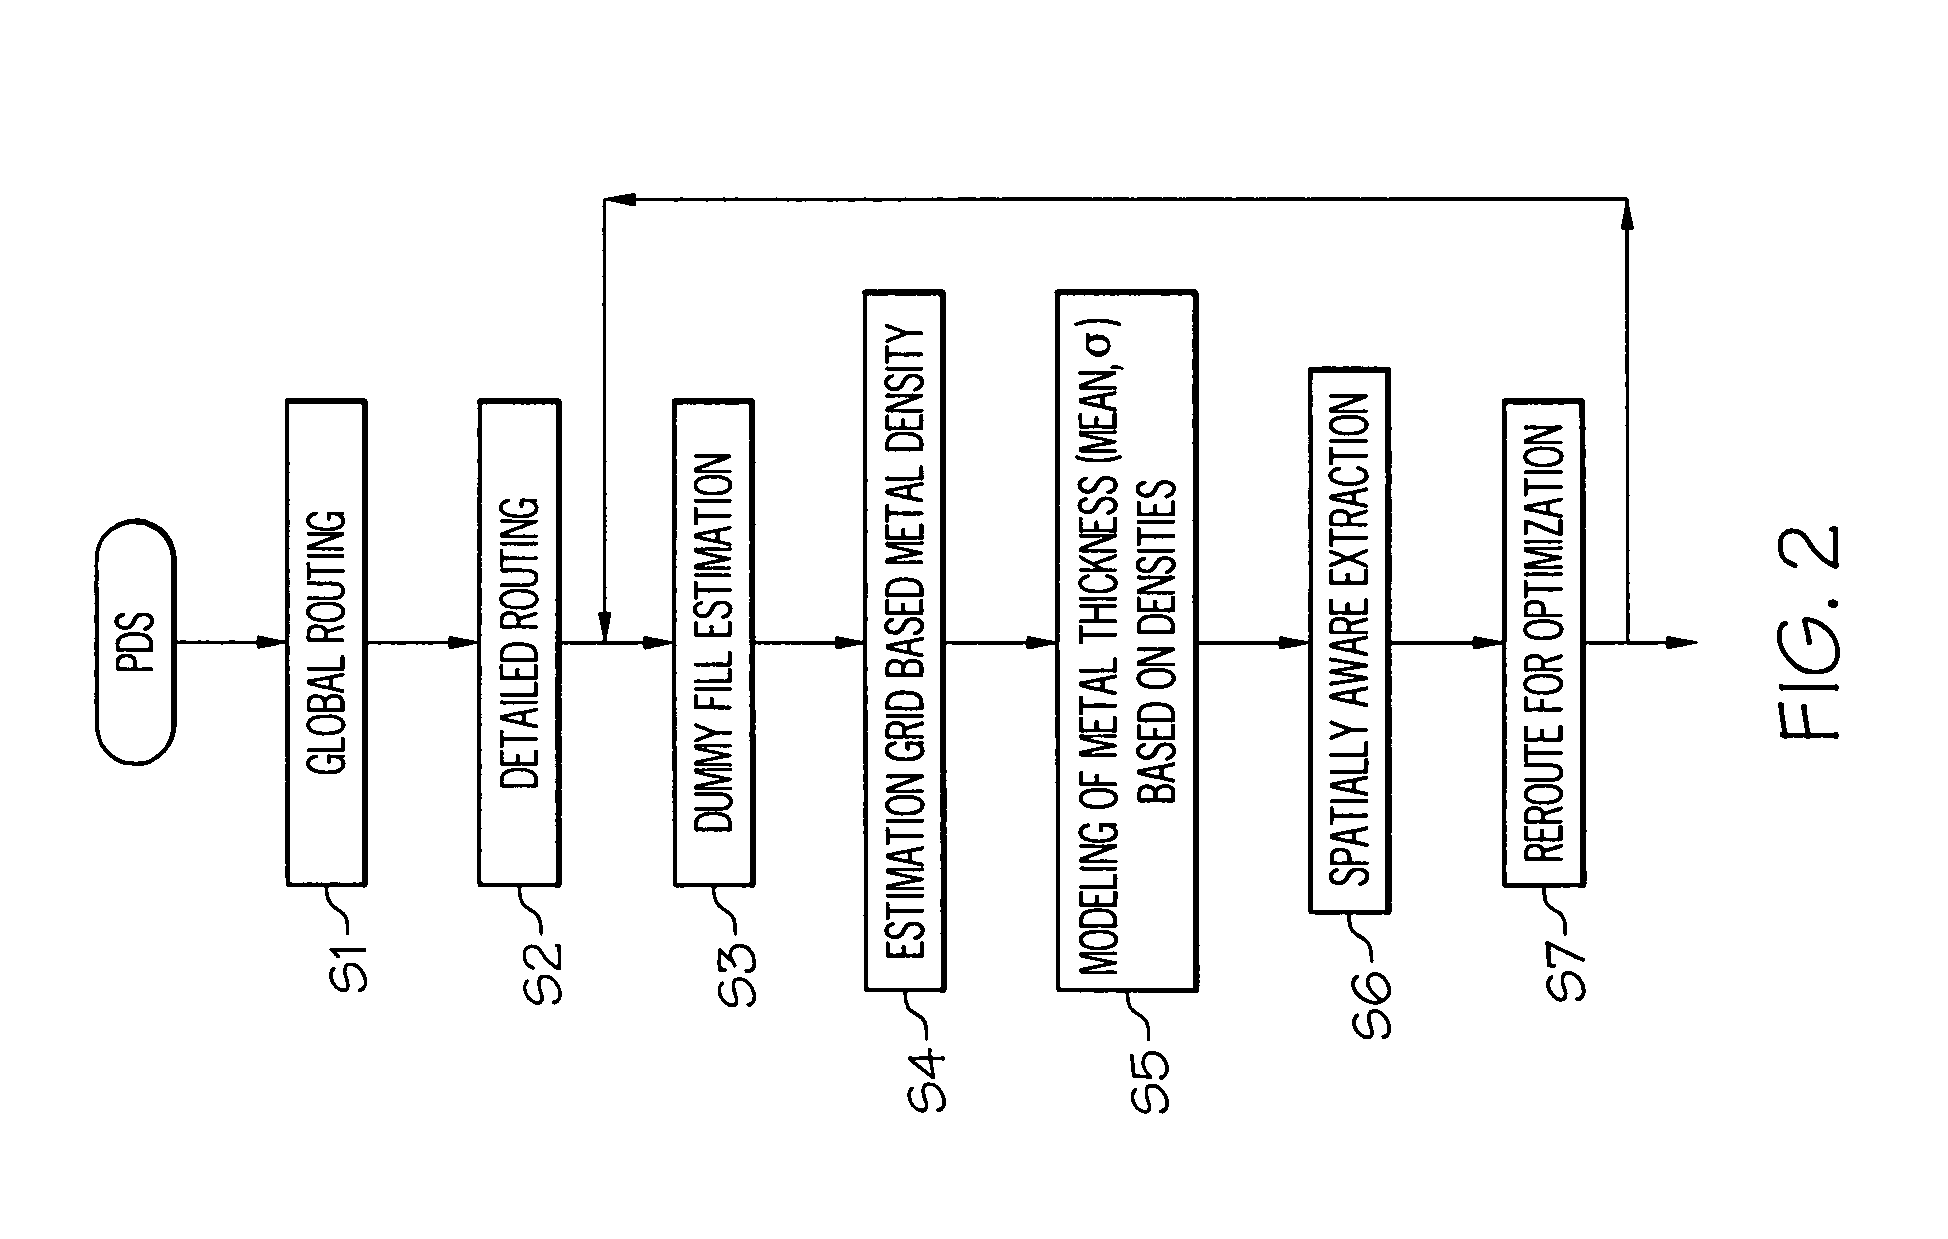 Design stage mitigation of interconnect variability